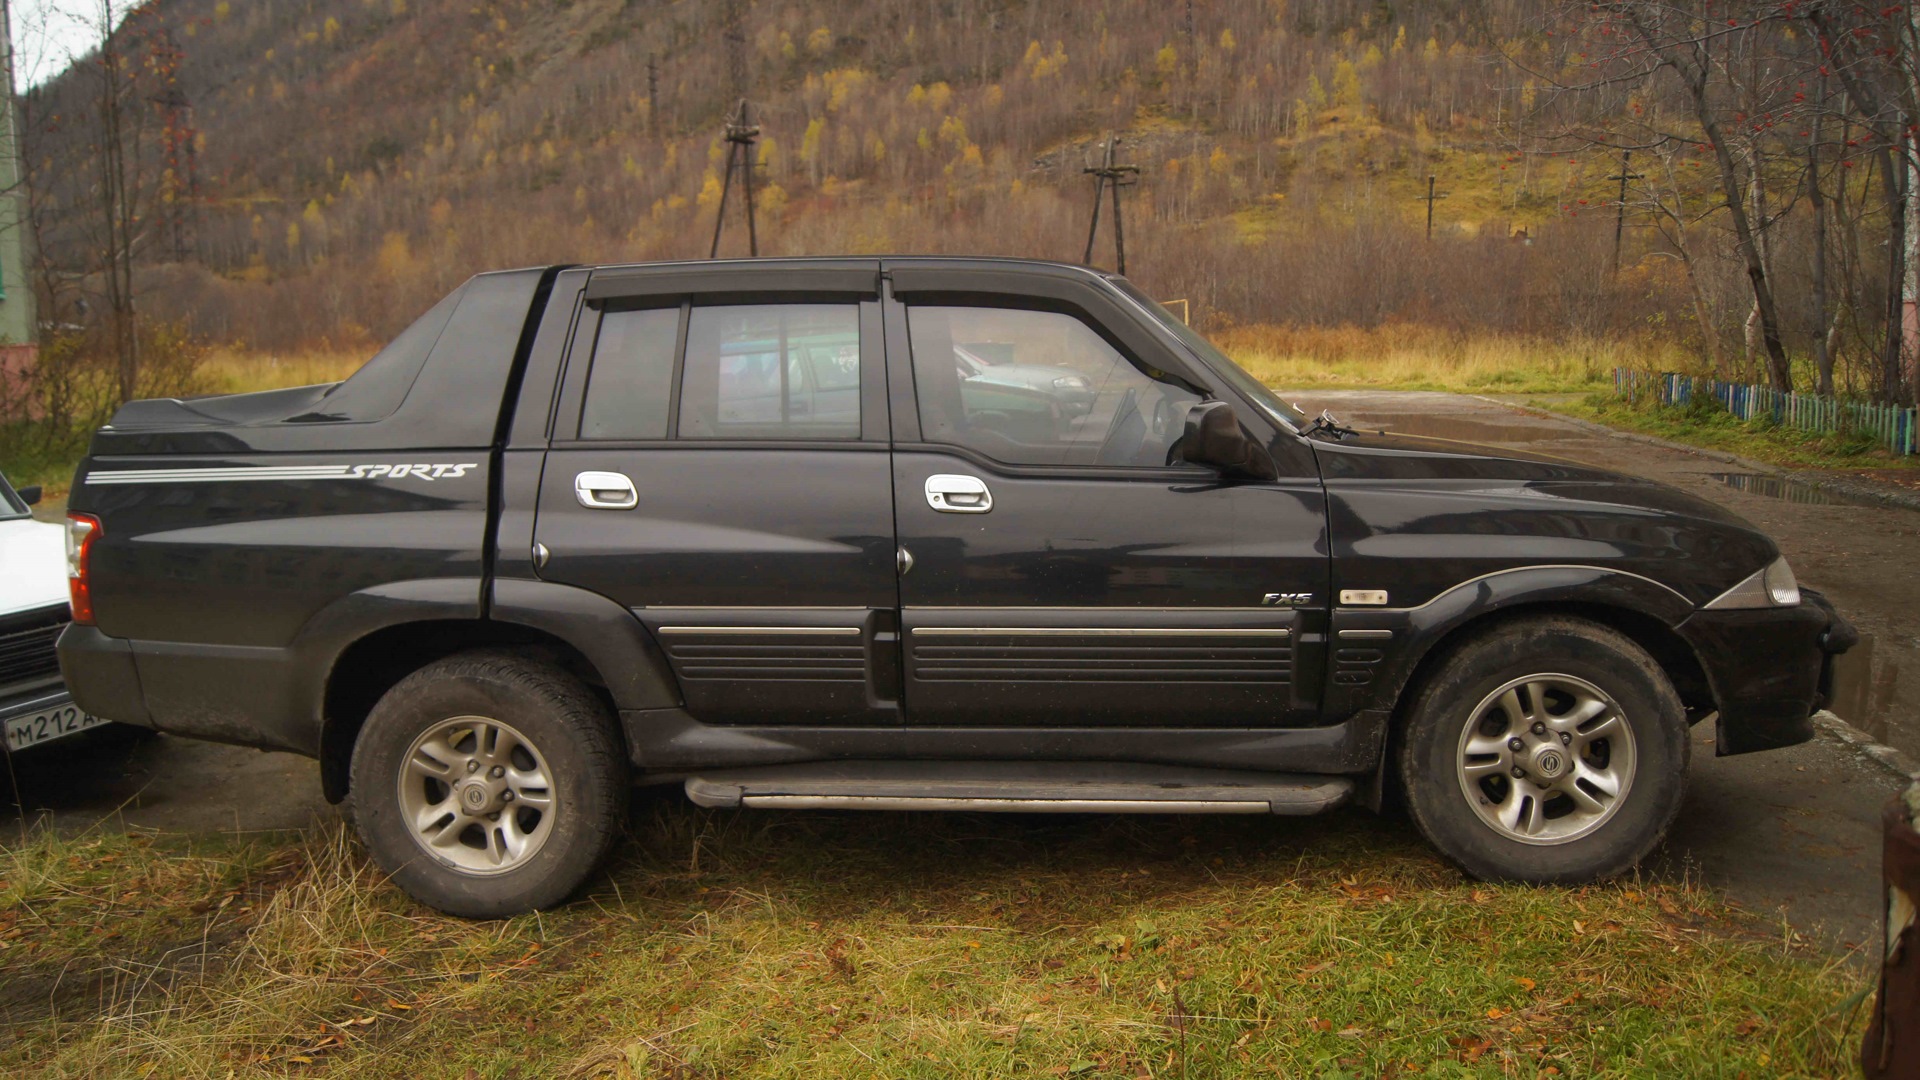 Ssangyong musso sports. Санг Йонг Муссо пикап. SSANGYONG Musso Sports, 2005. SSANGYONG Musso 2009.